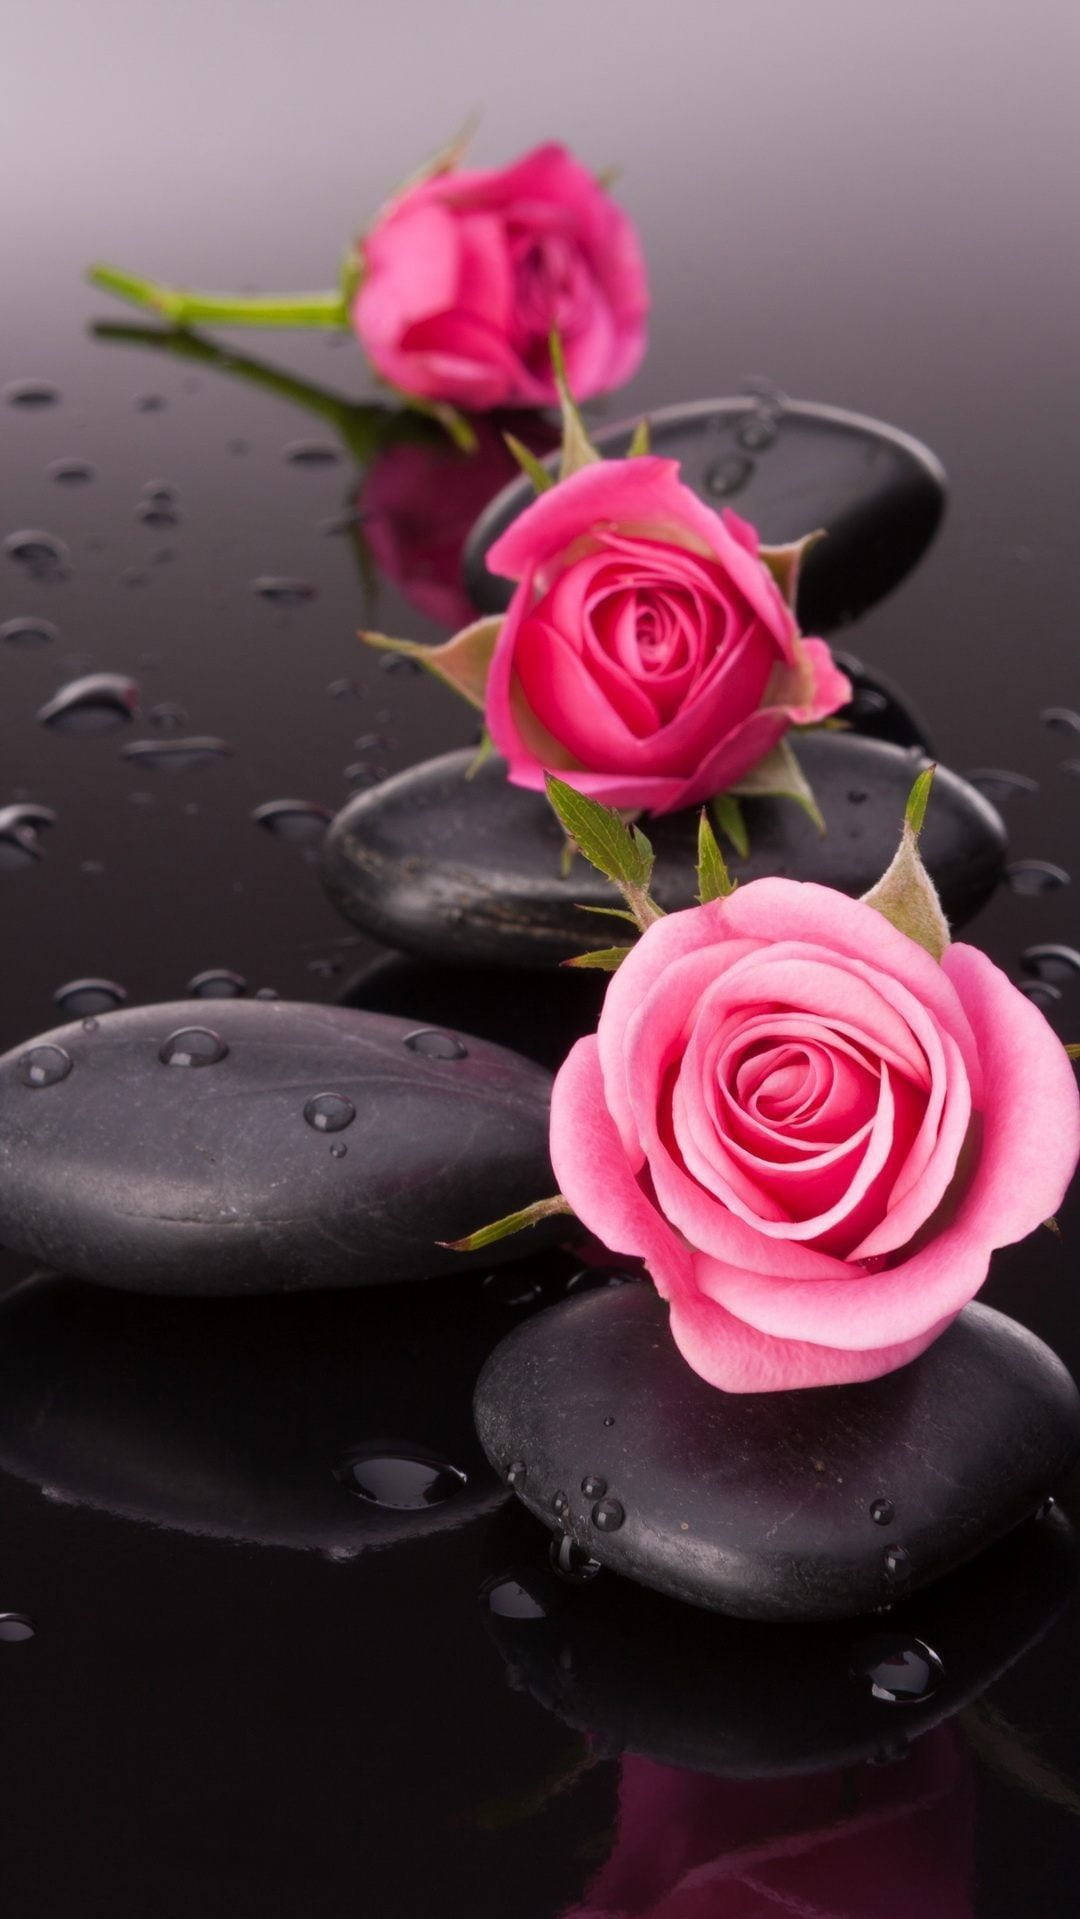 Spa Stone And Pink Roses Flower Mobile